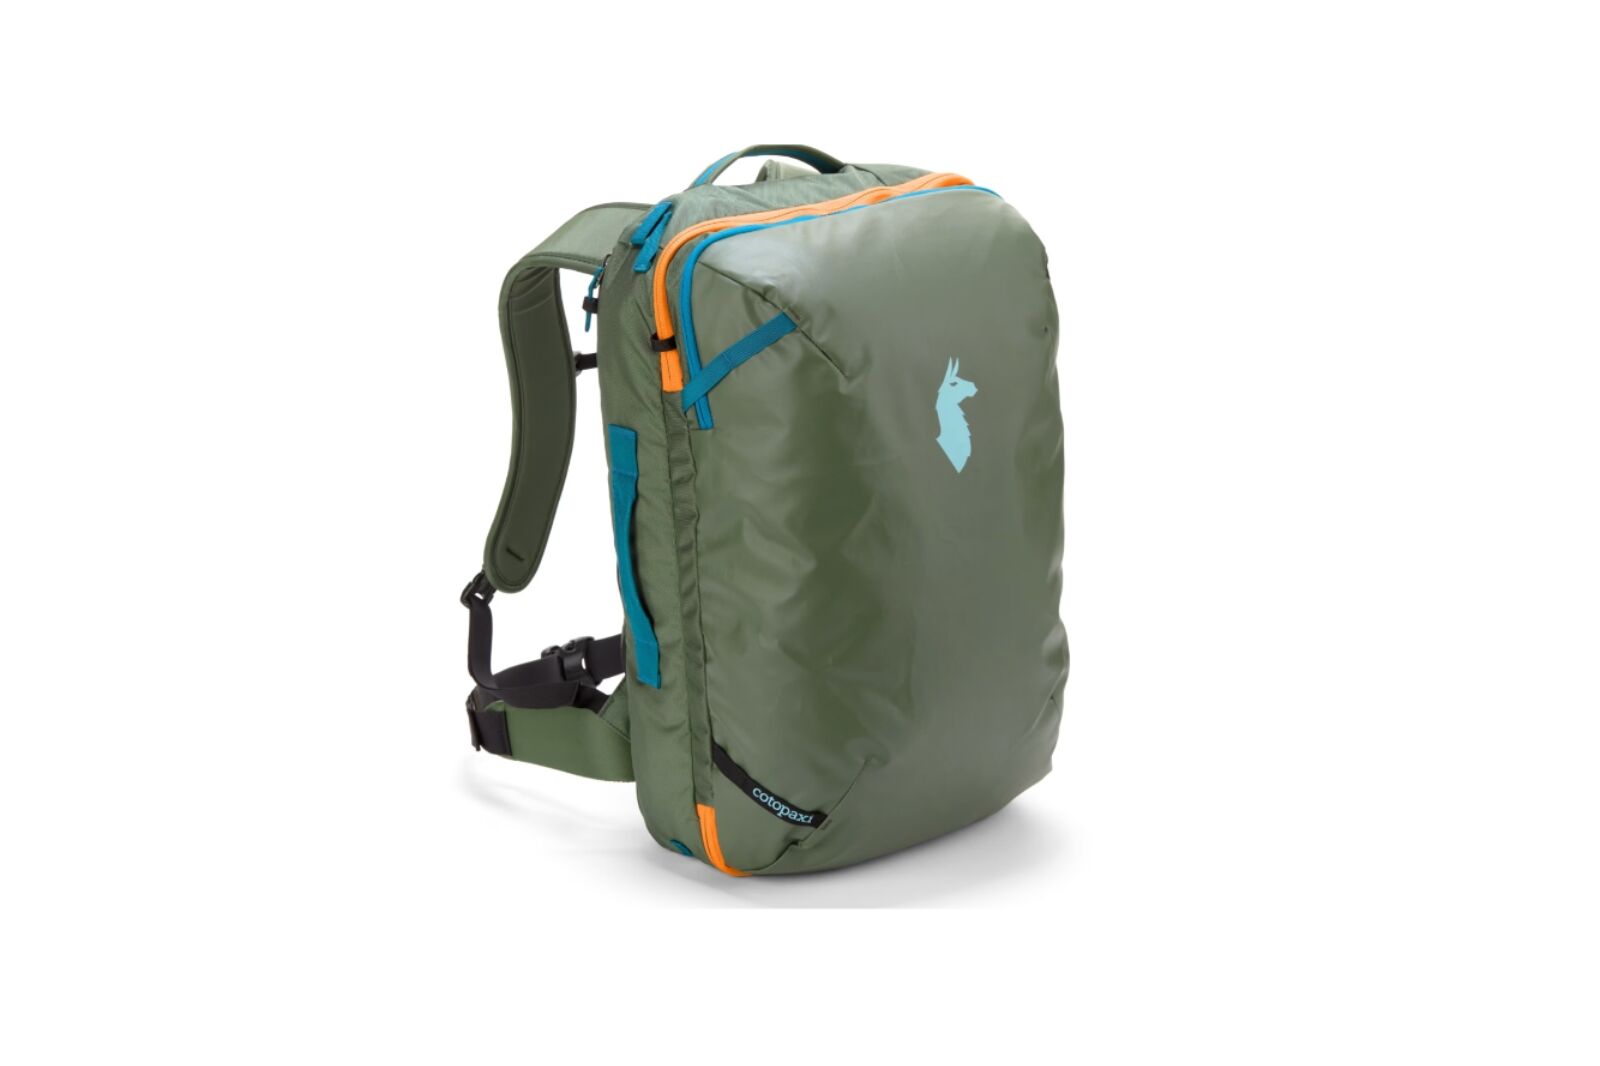 Travel pack from REI essential african safari gear